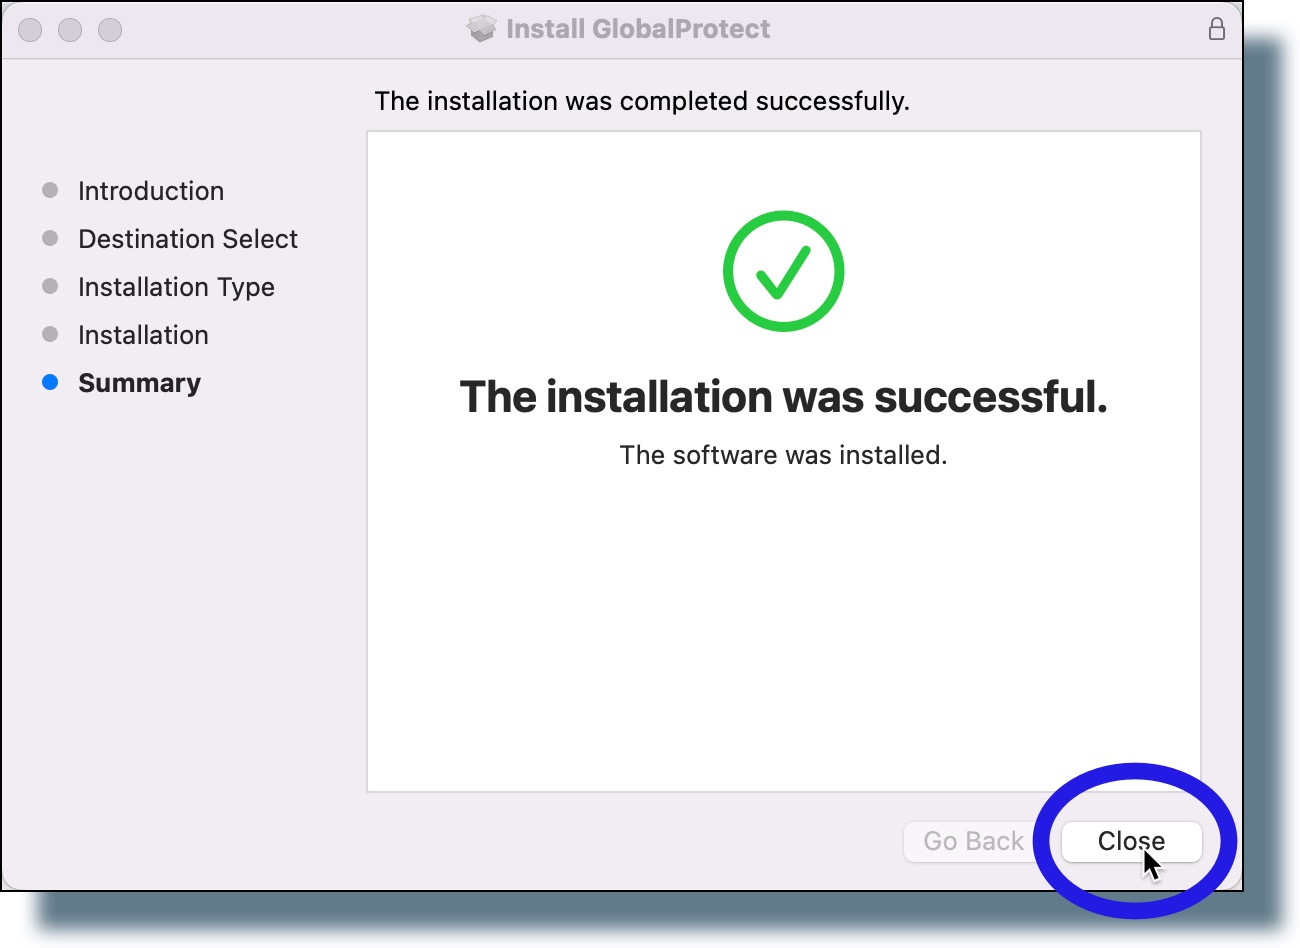 Click "Close" in the installation confirmation window.